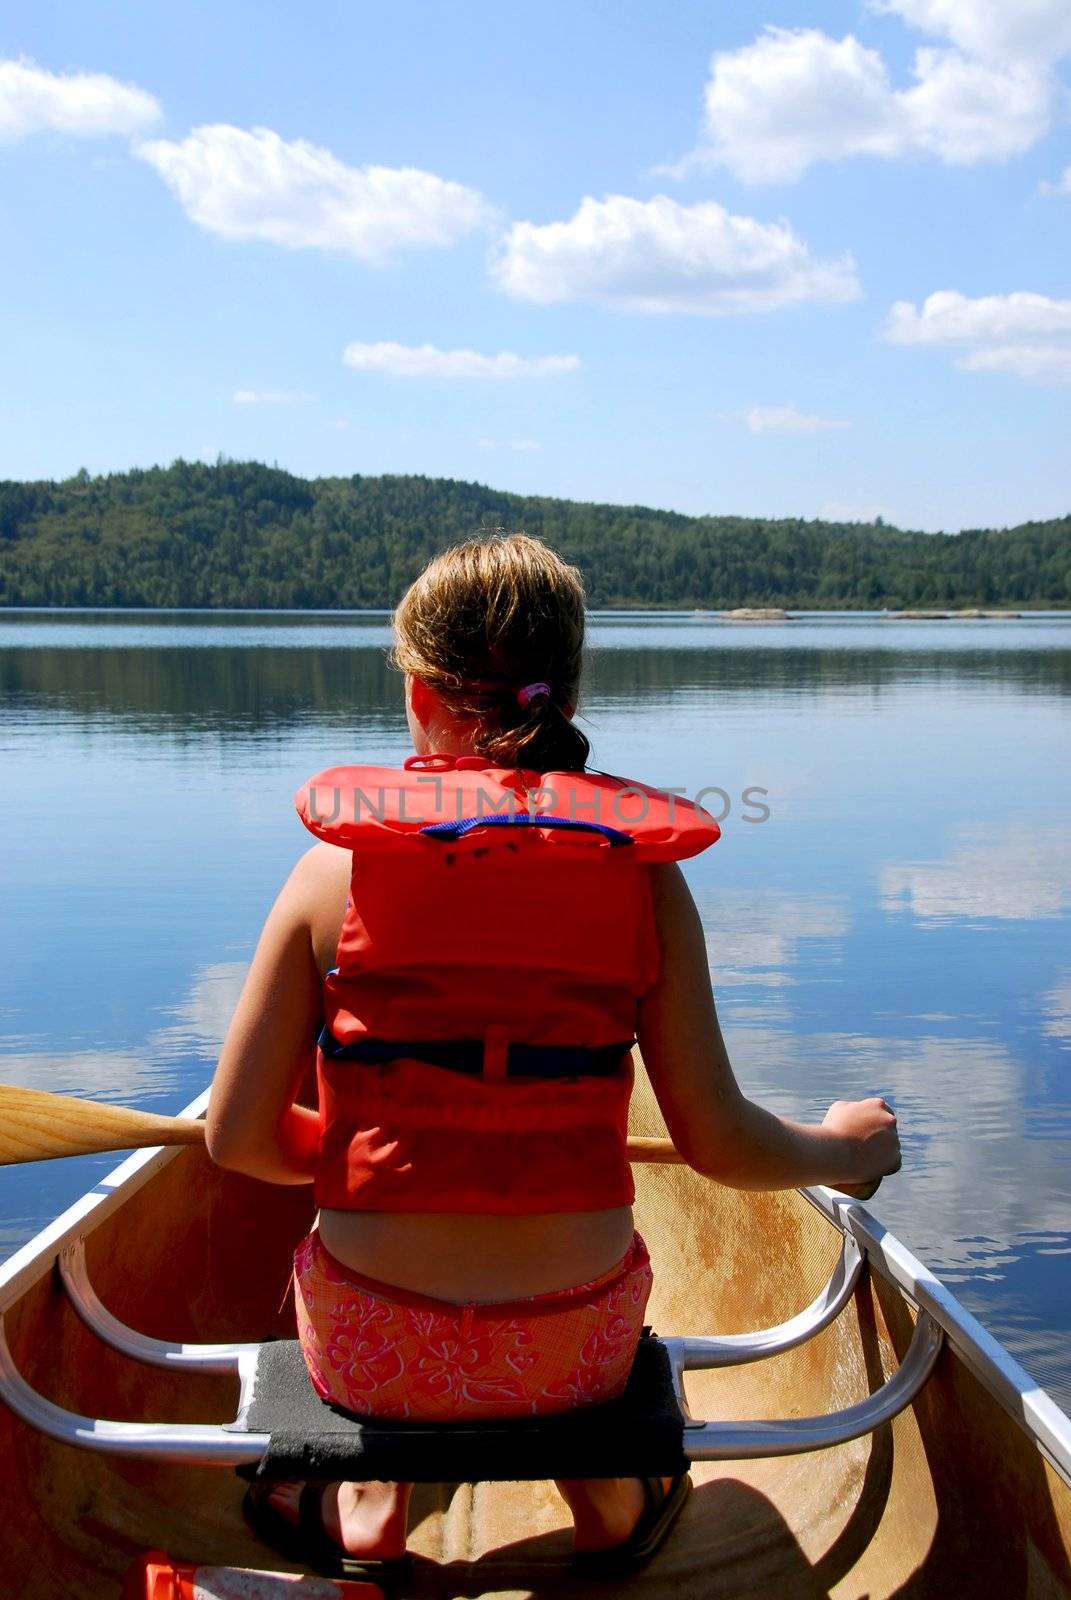 Child in canoe paddling on a scenic lake